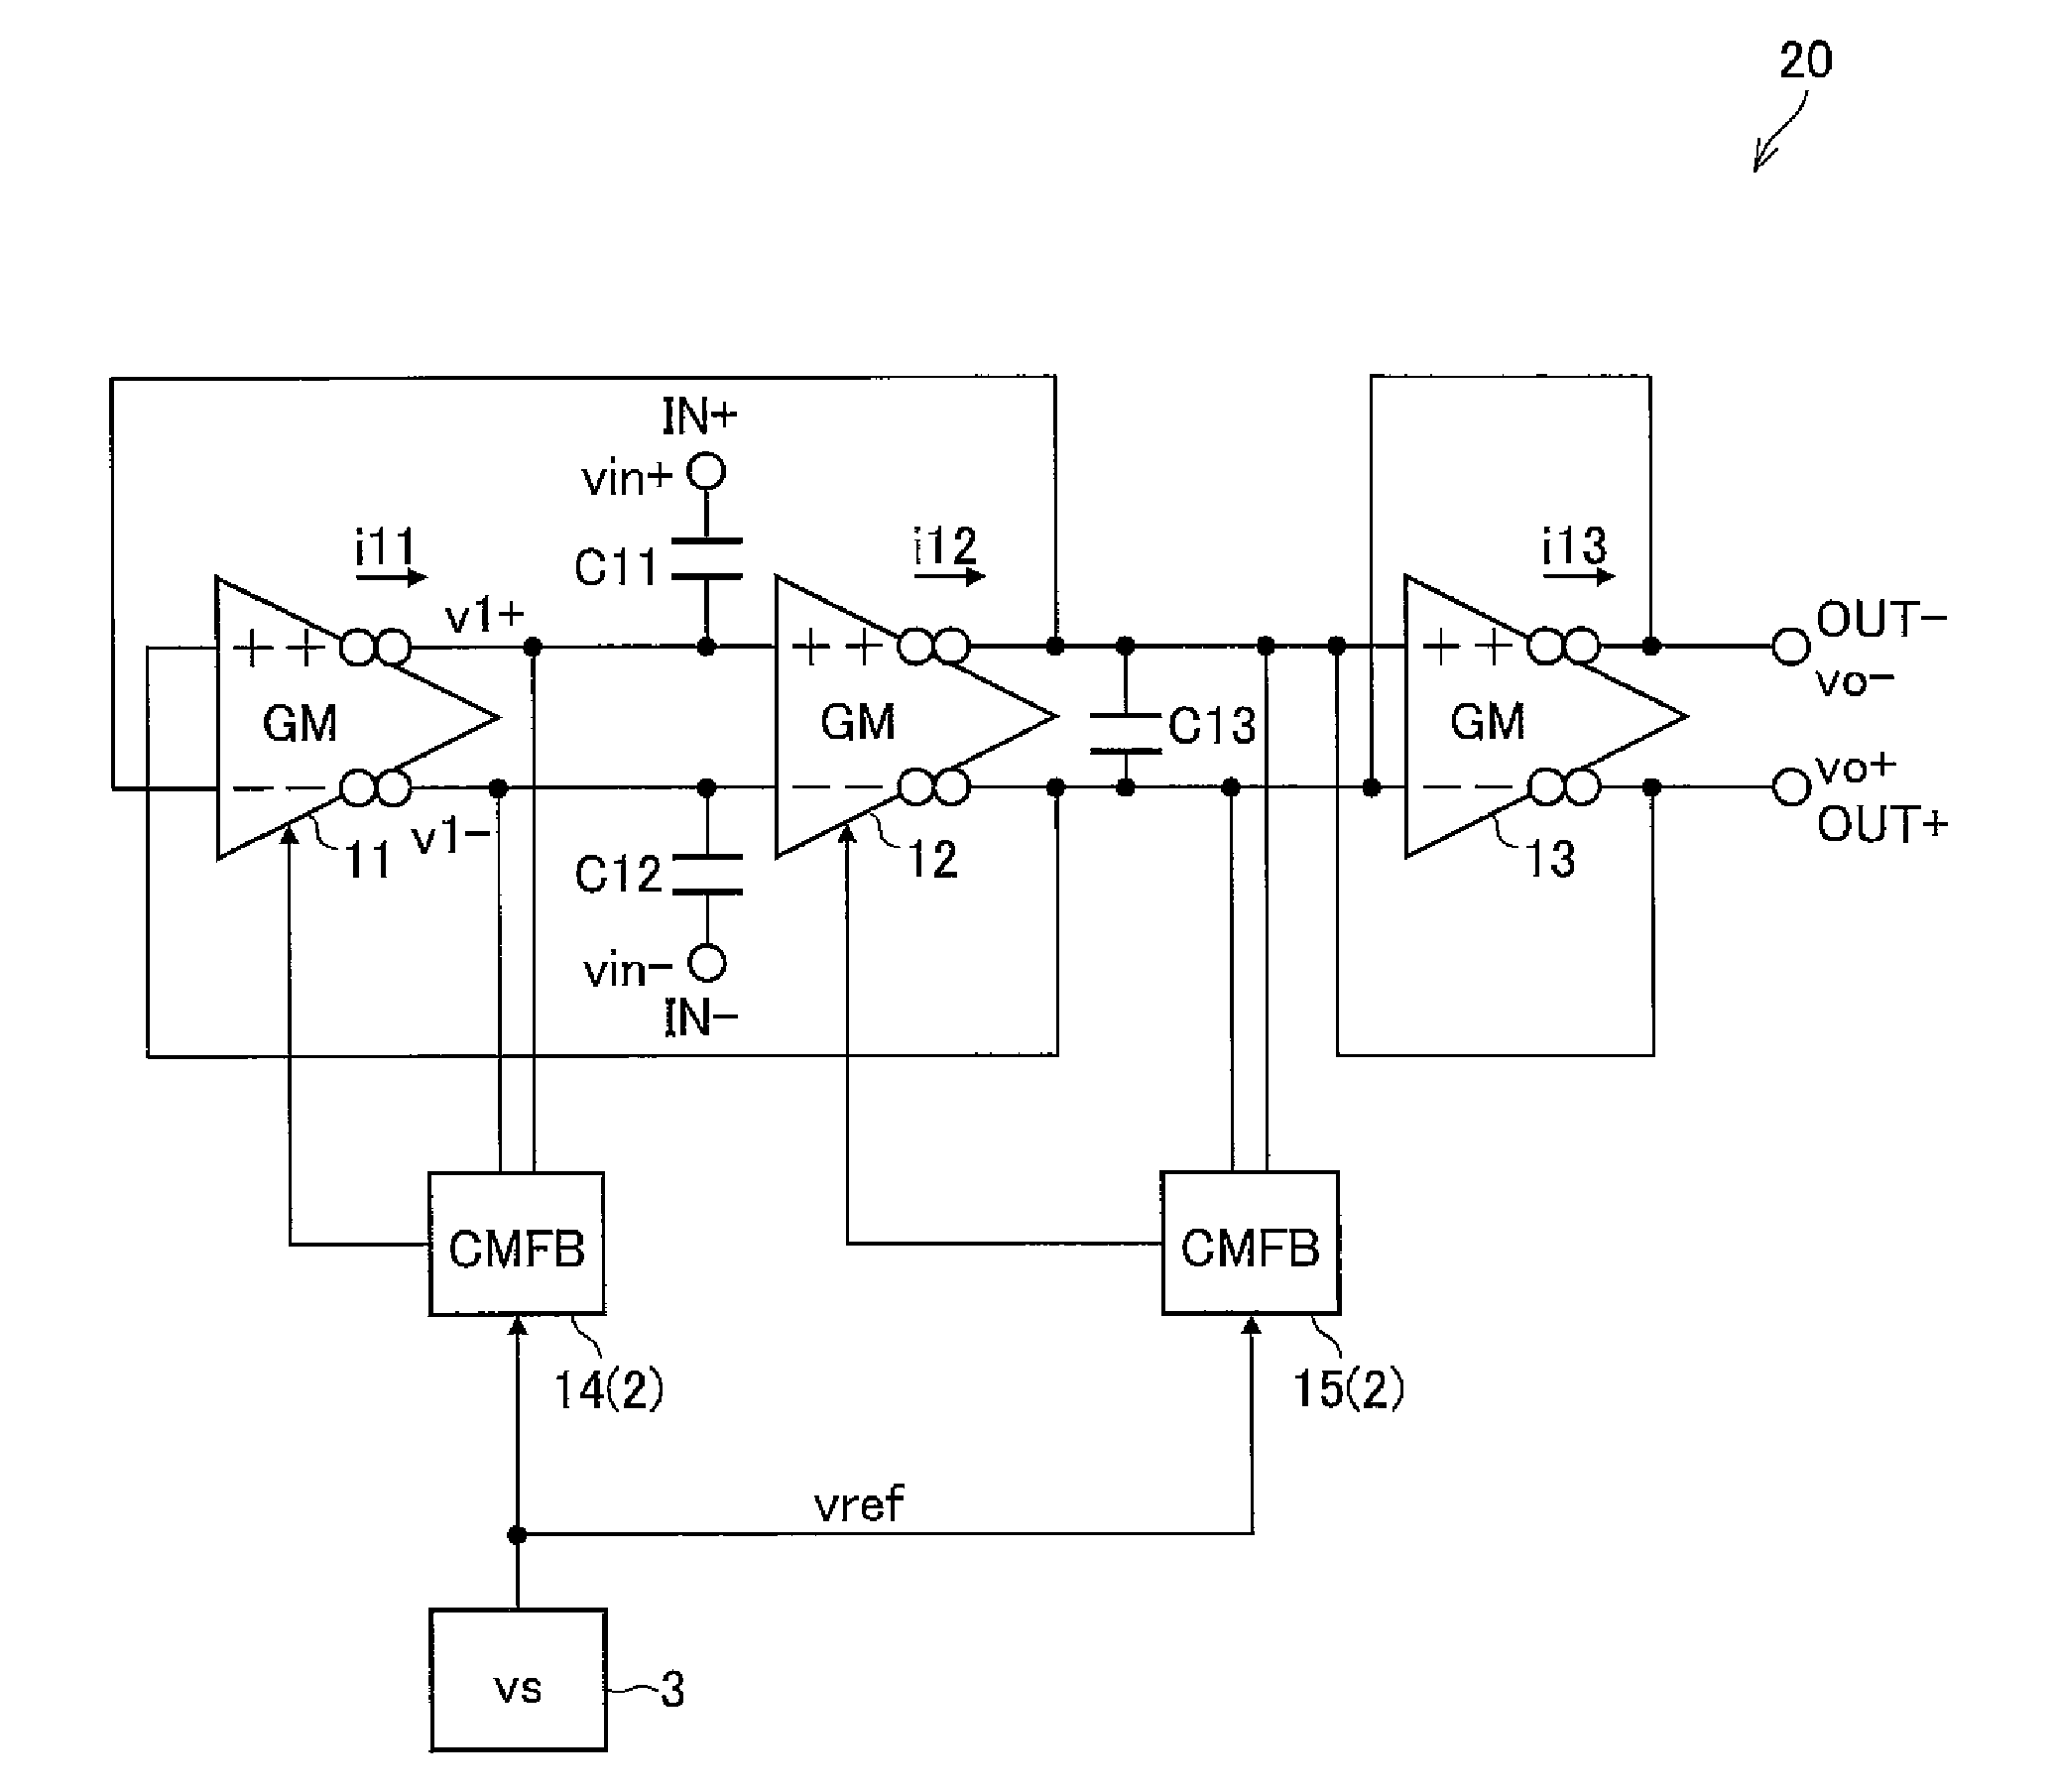 Operational amplifier circuit, bandpass filter circuit, and infrared signal processing circuit